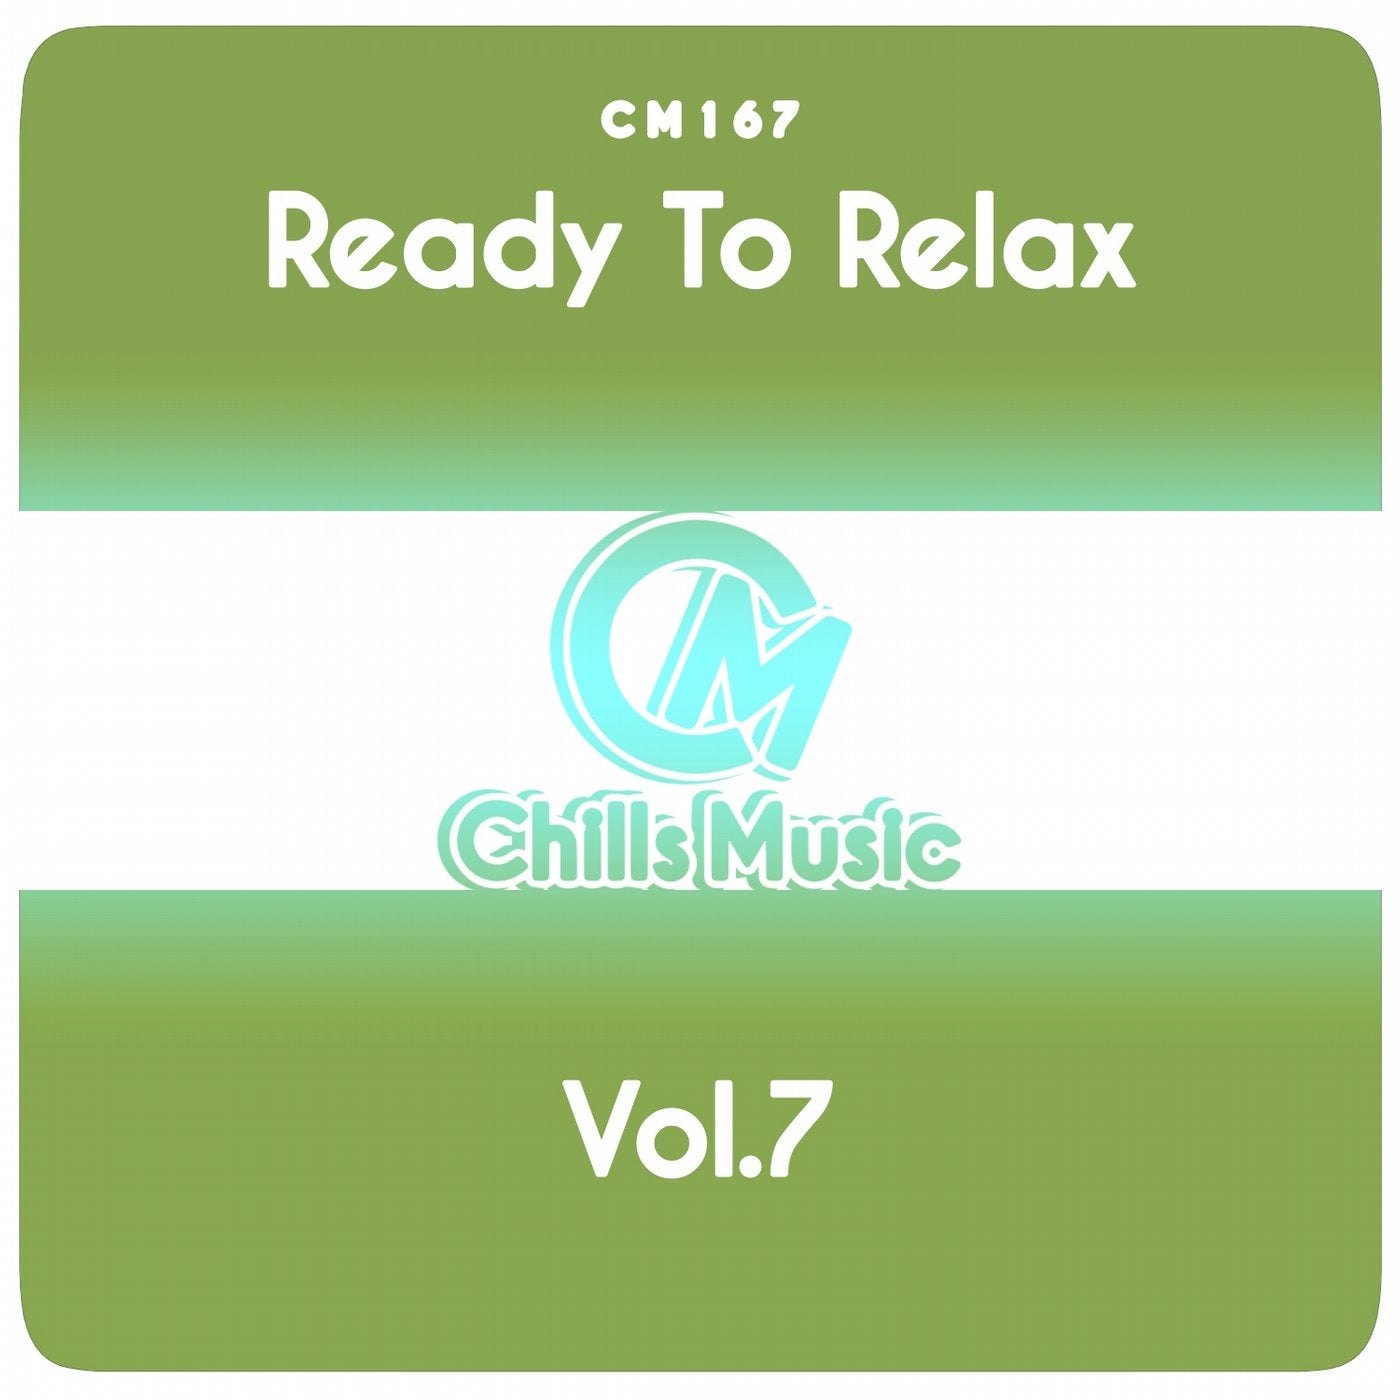 Ready to Relax, Vol.7